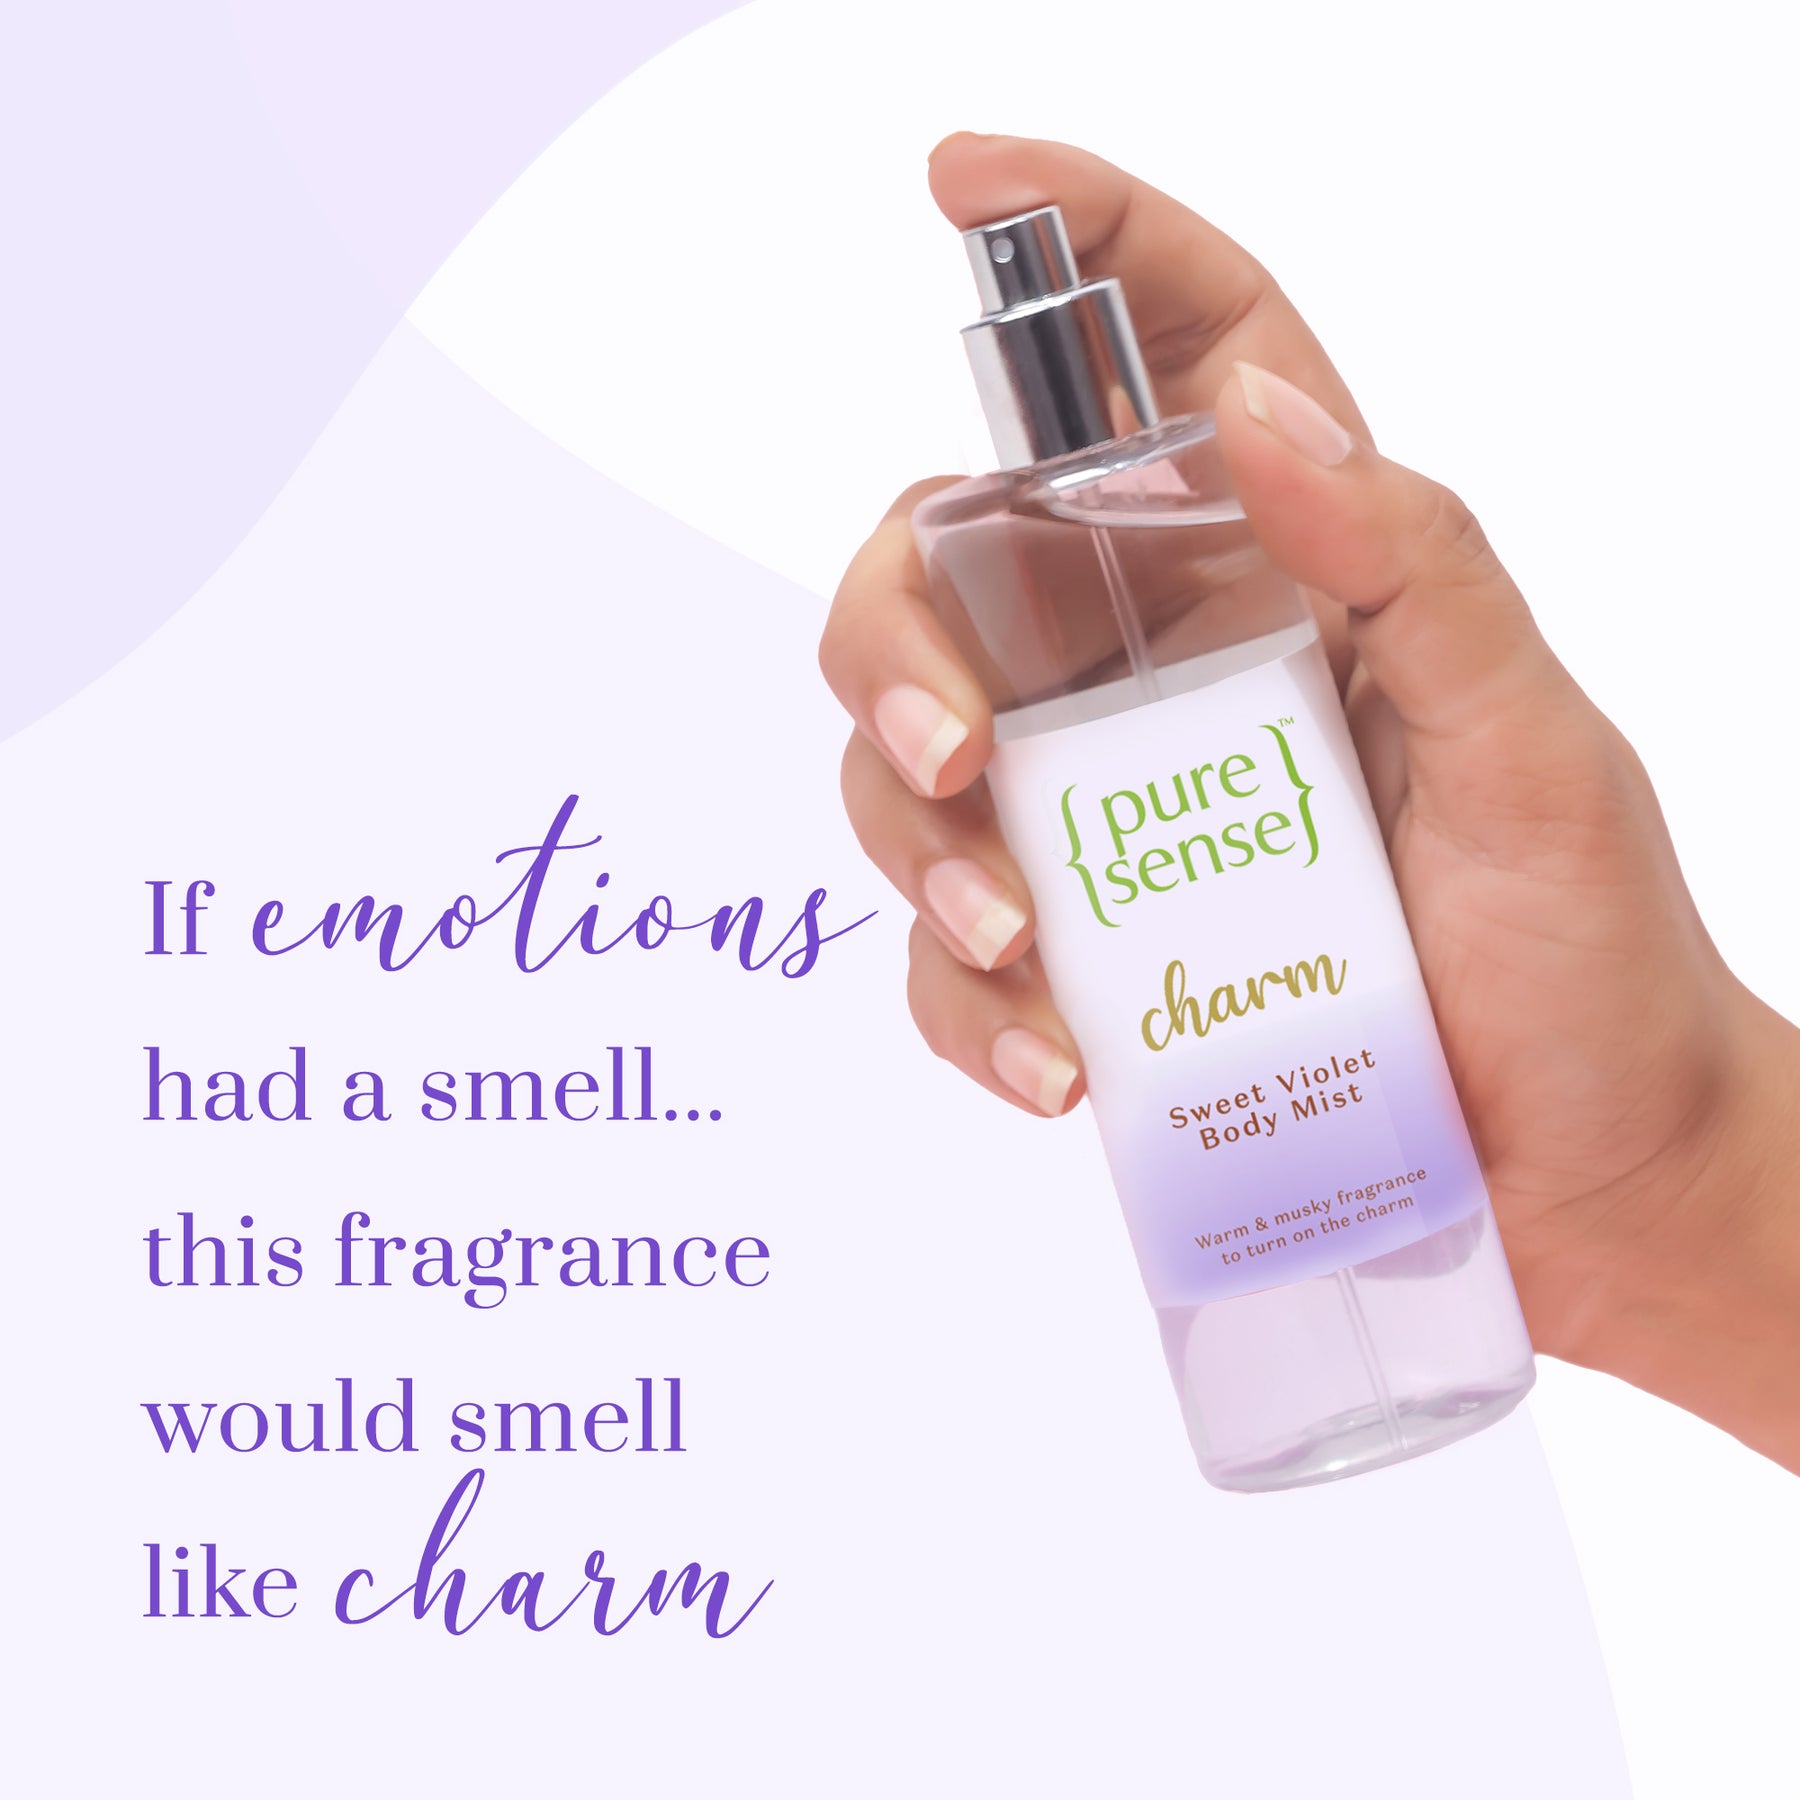 Charm Sweet Violet Body Mist | From the makers of Parachute Advansed | 150ml